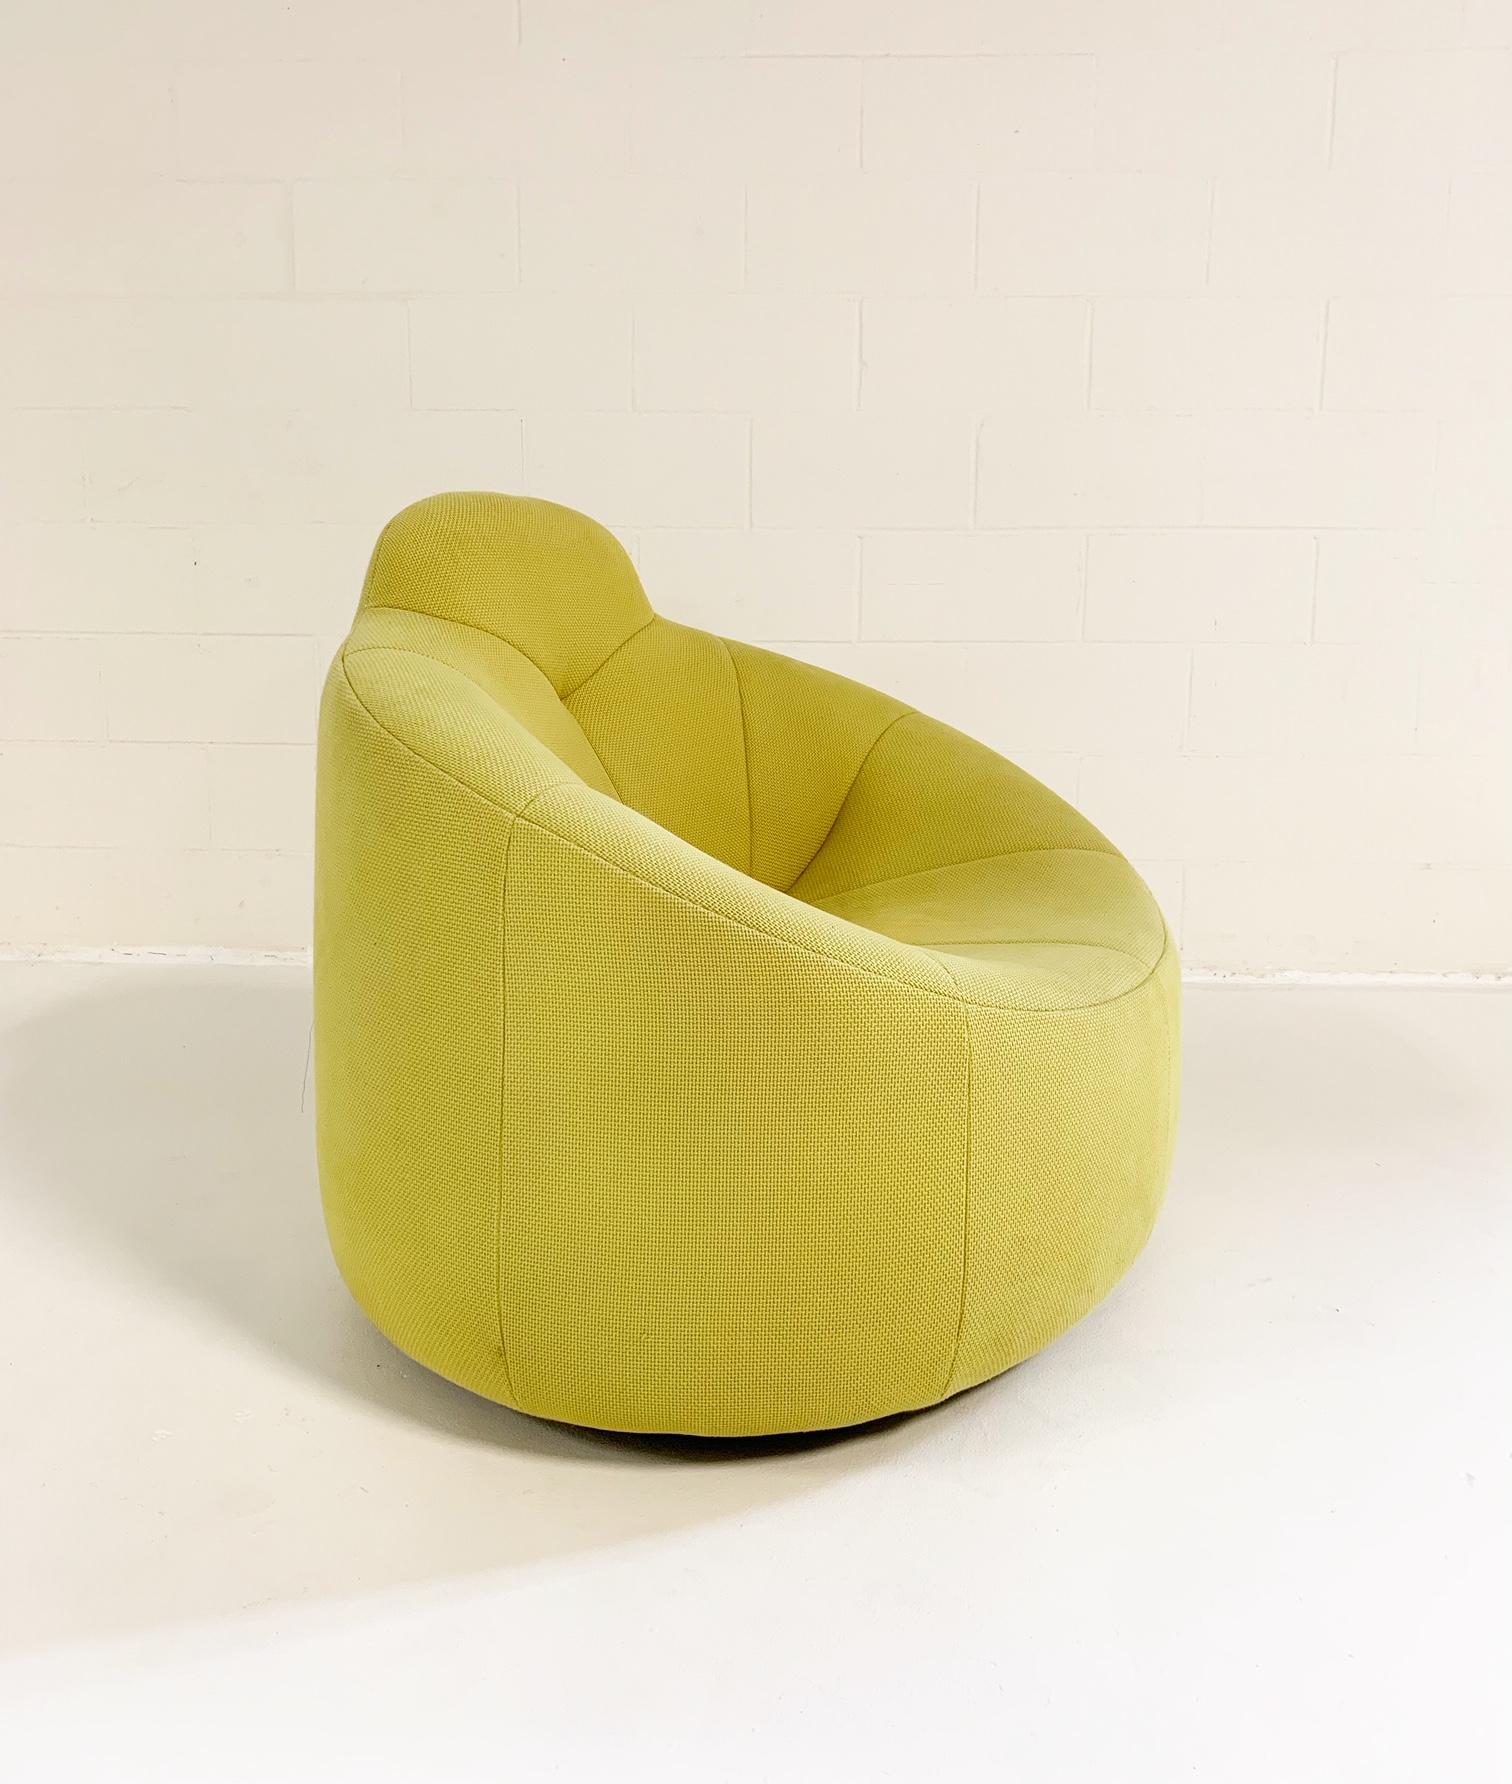 Description
From Ligne Roset website: As suggested by its name, soft, organic, round shapes and firm seating comfort all characterize the Pumpkin collection. Resisting its appeal is impossible!

We collected this chair and loved the bright, fun